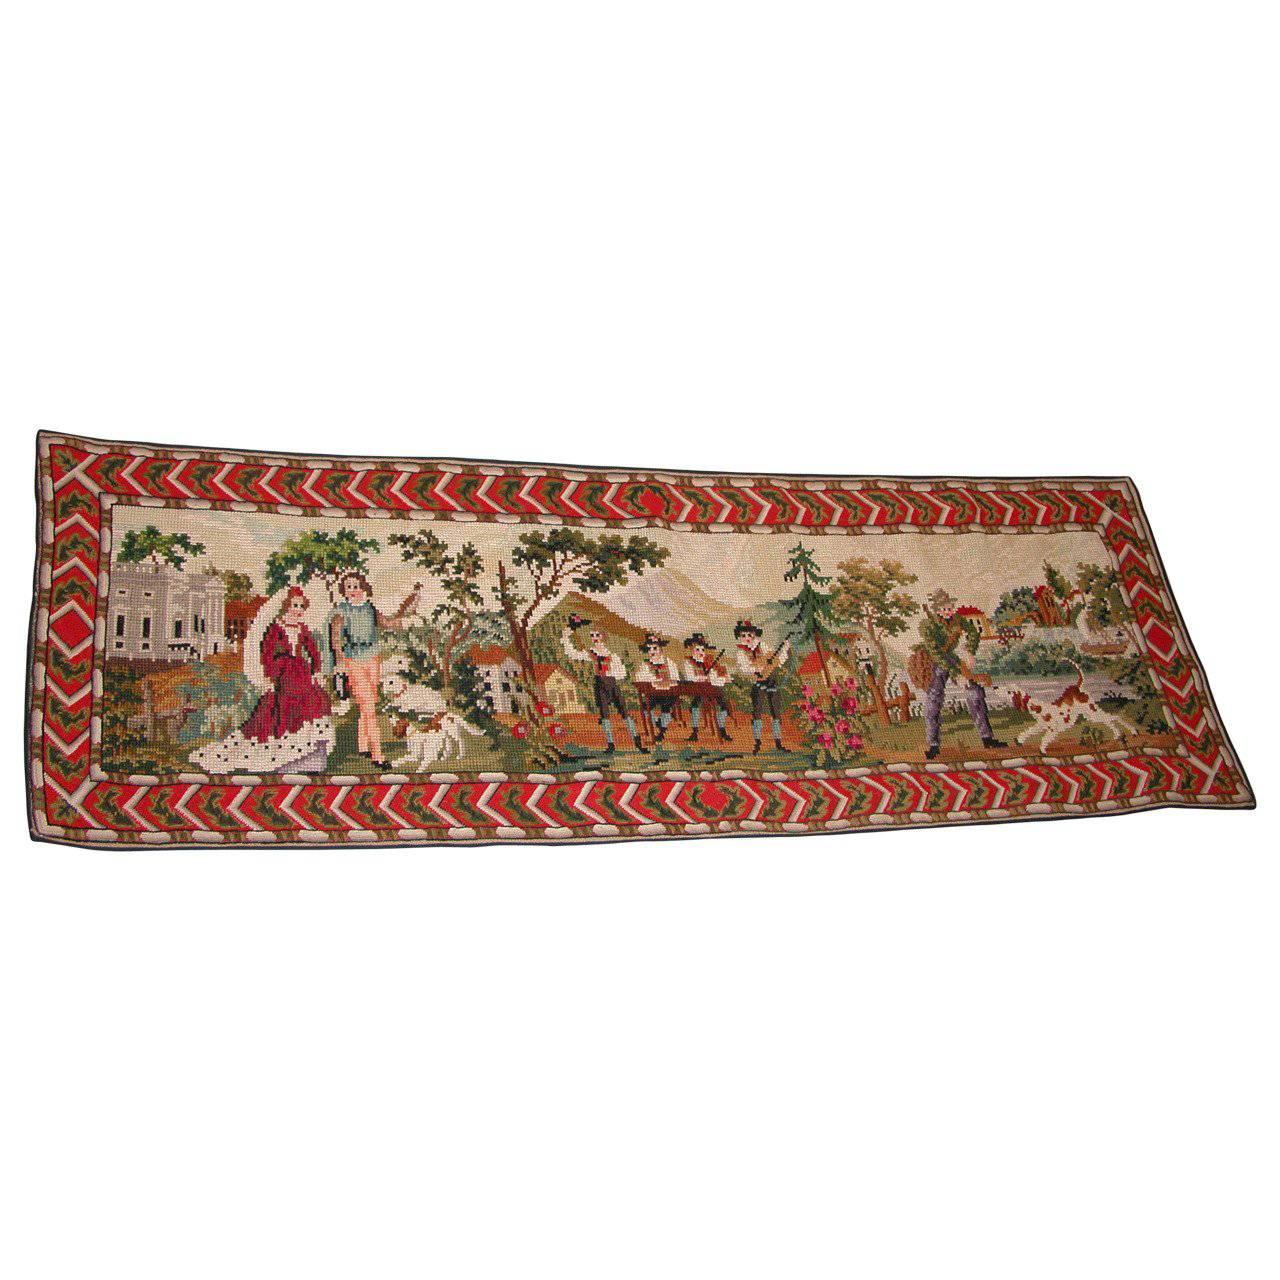 Early 20th Century Needlepoint Runner Depicting Austrian Figures